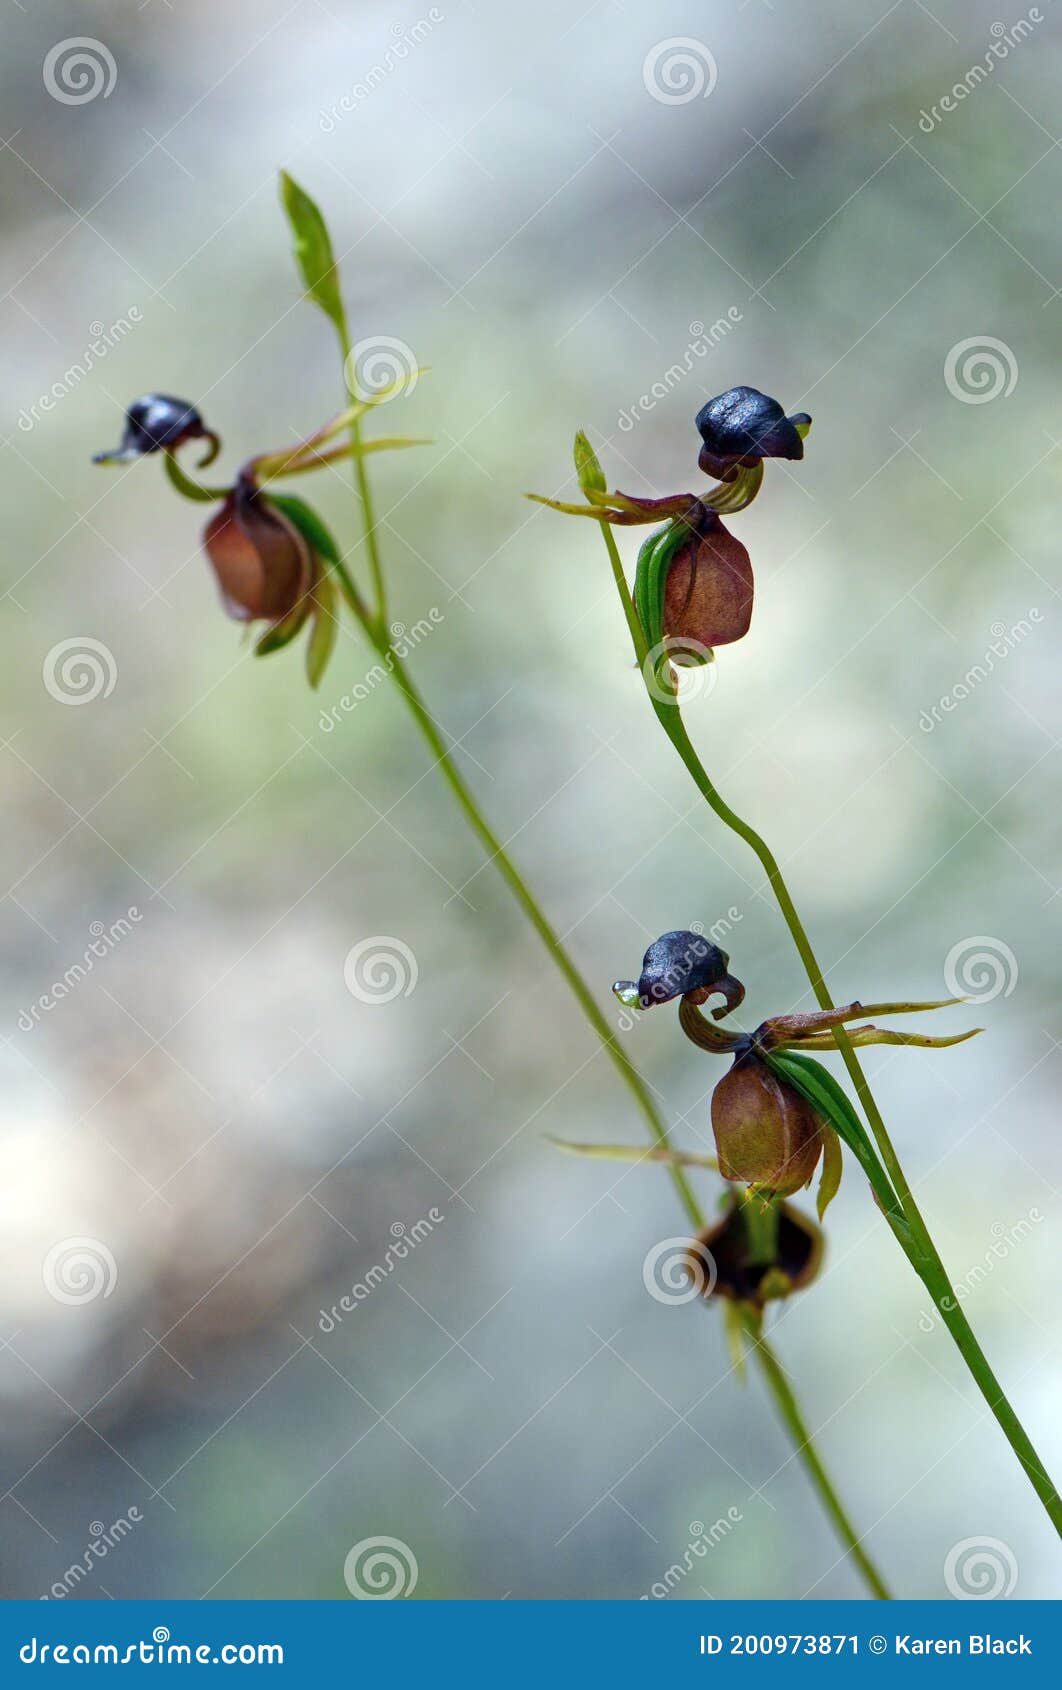 Flying Duck Orchid-Rare flower seed